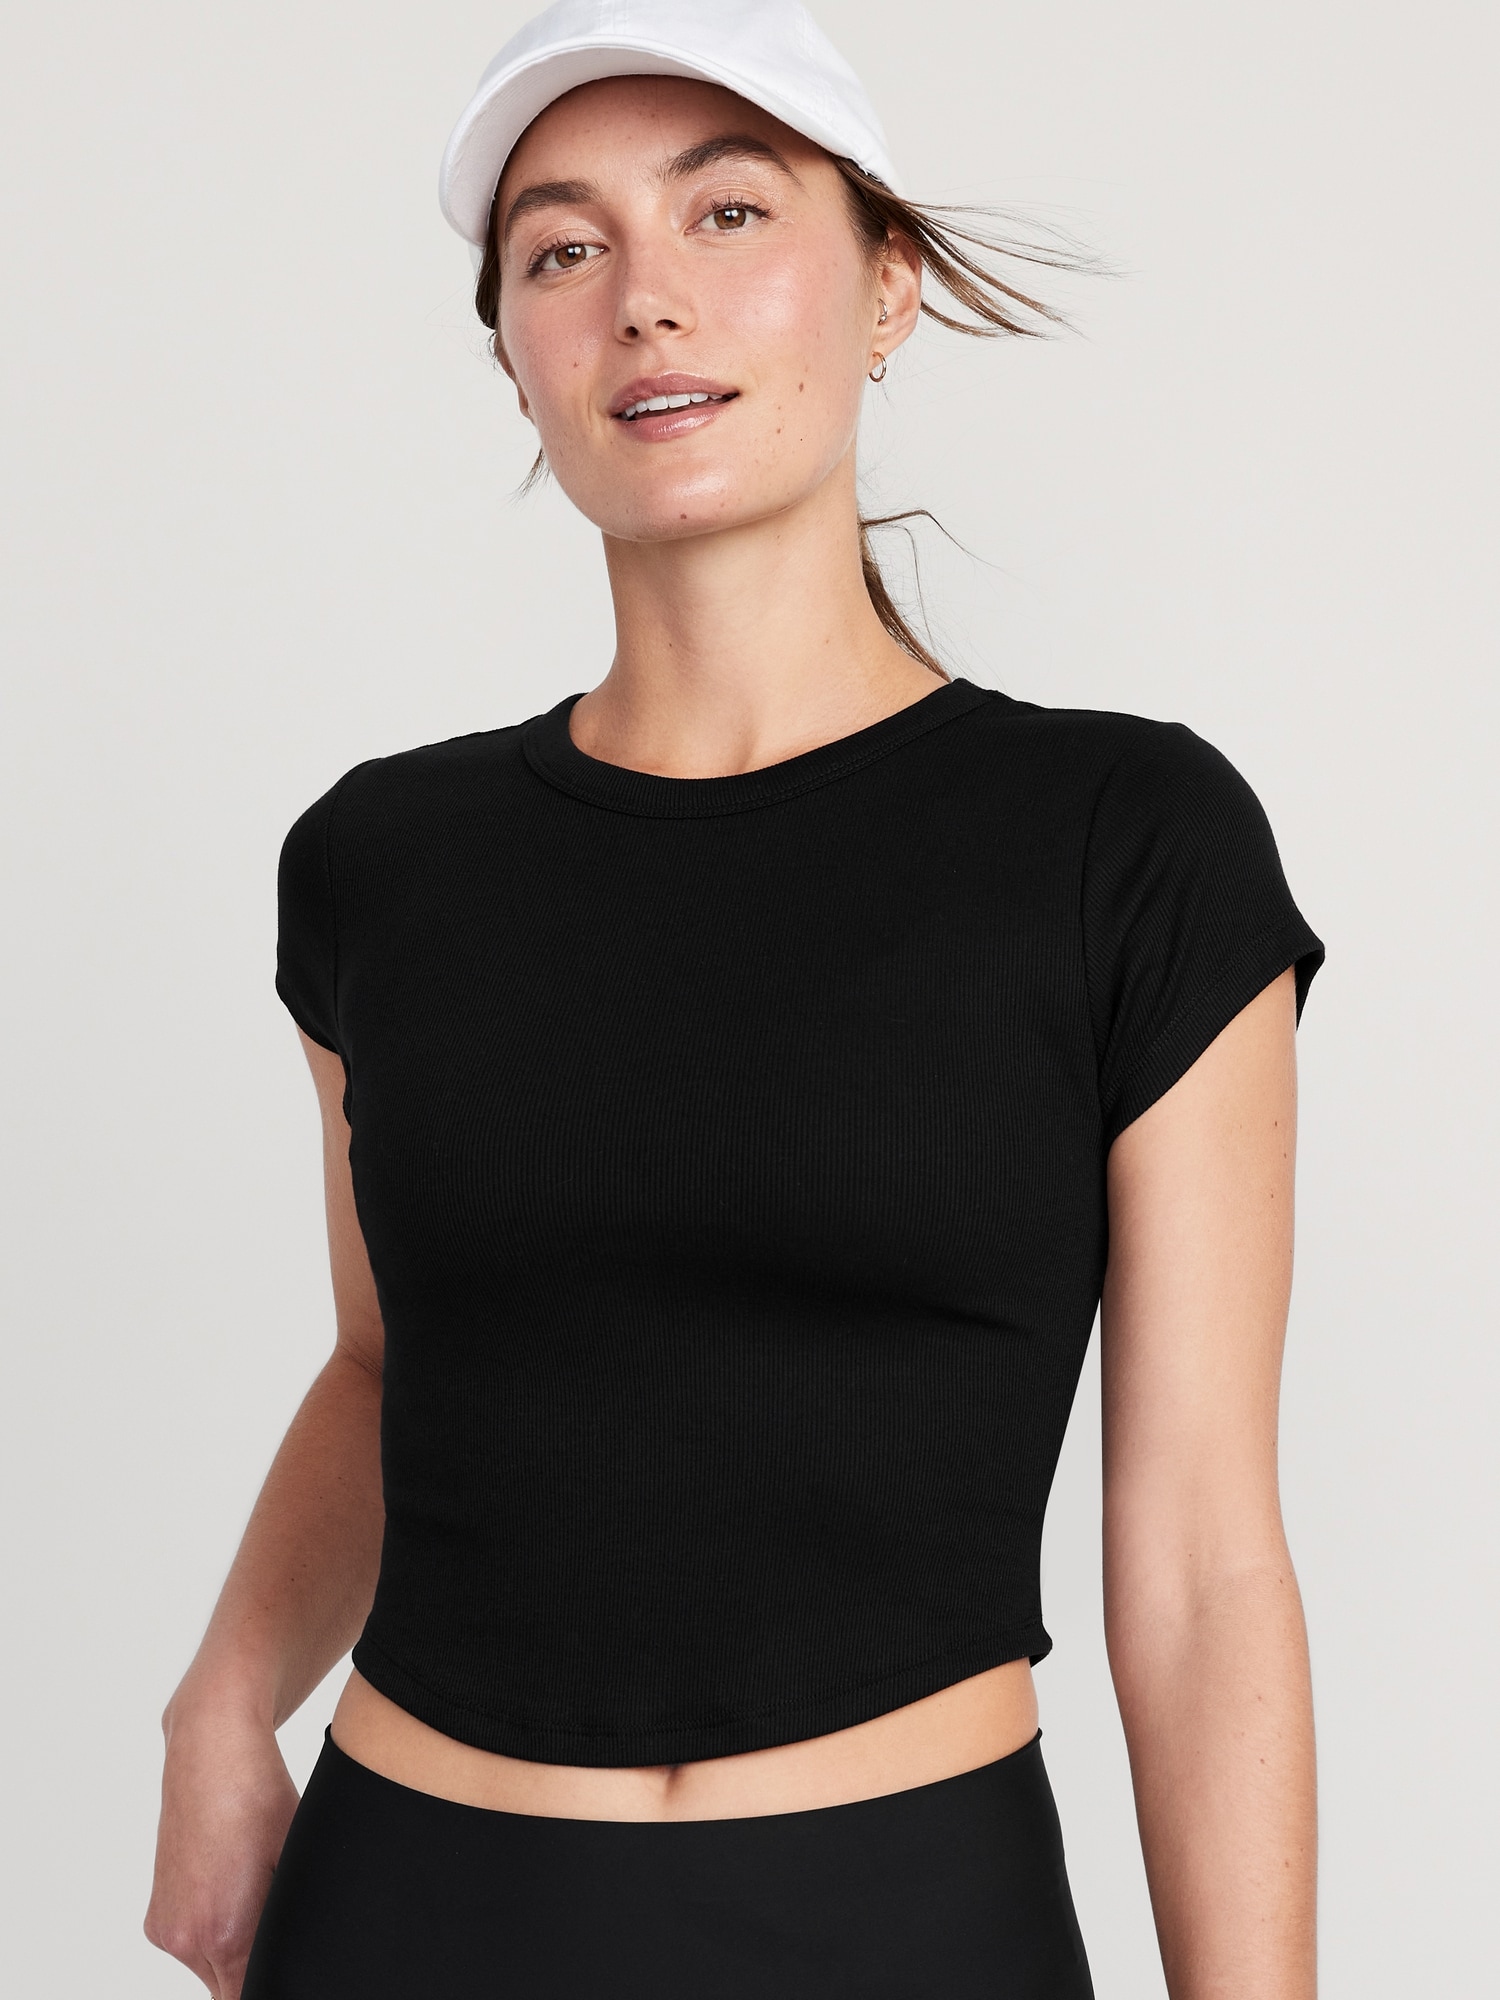 Old Navy UltraLite All-Day Performance Crop T-Shirt for Women